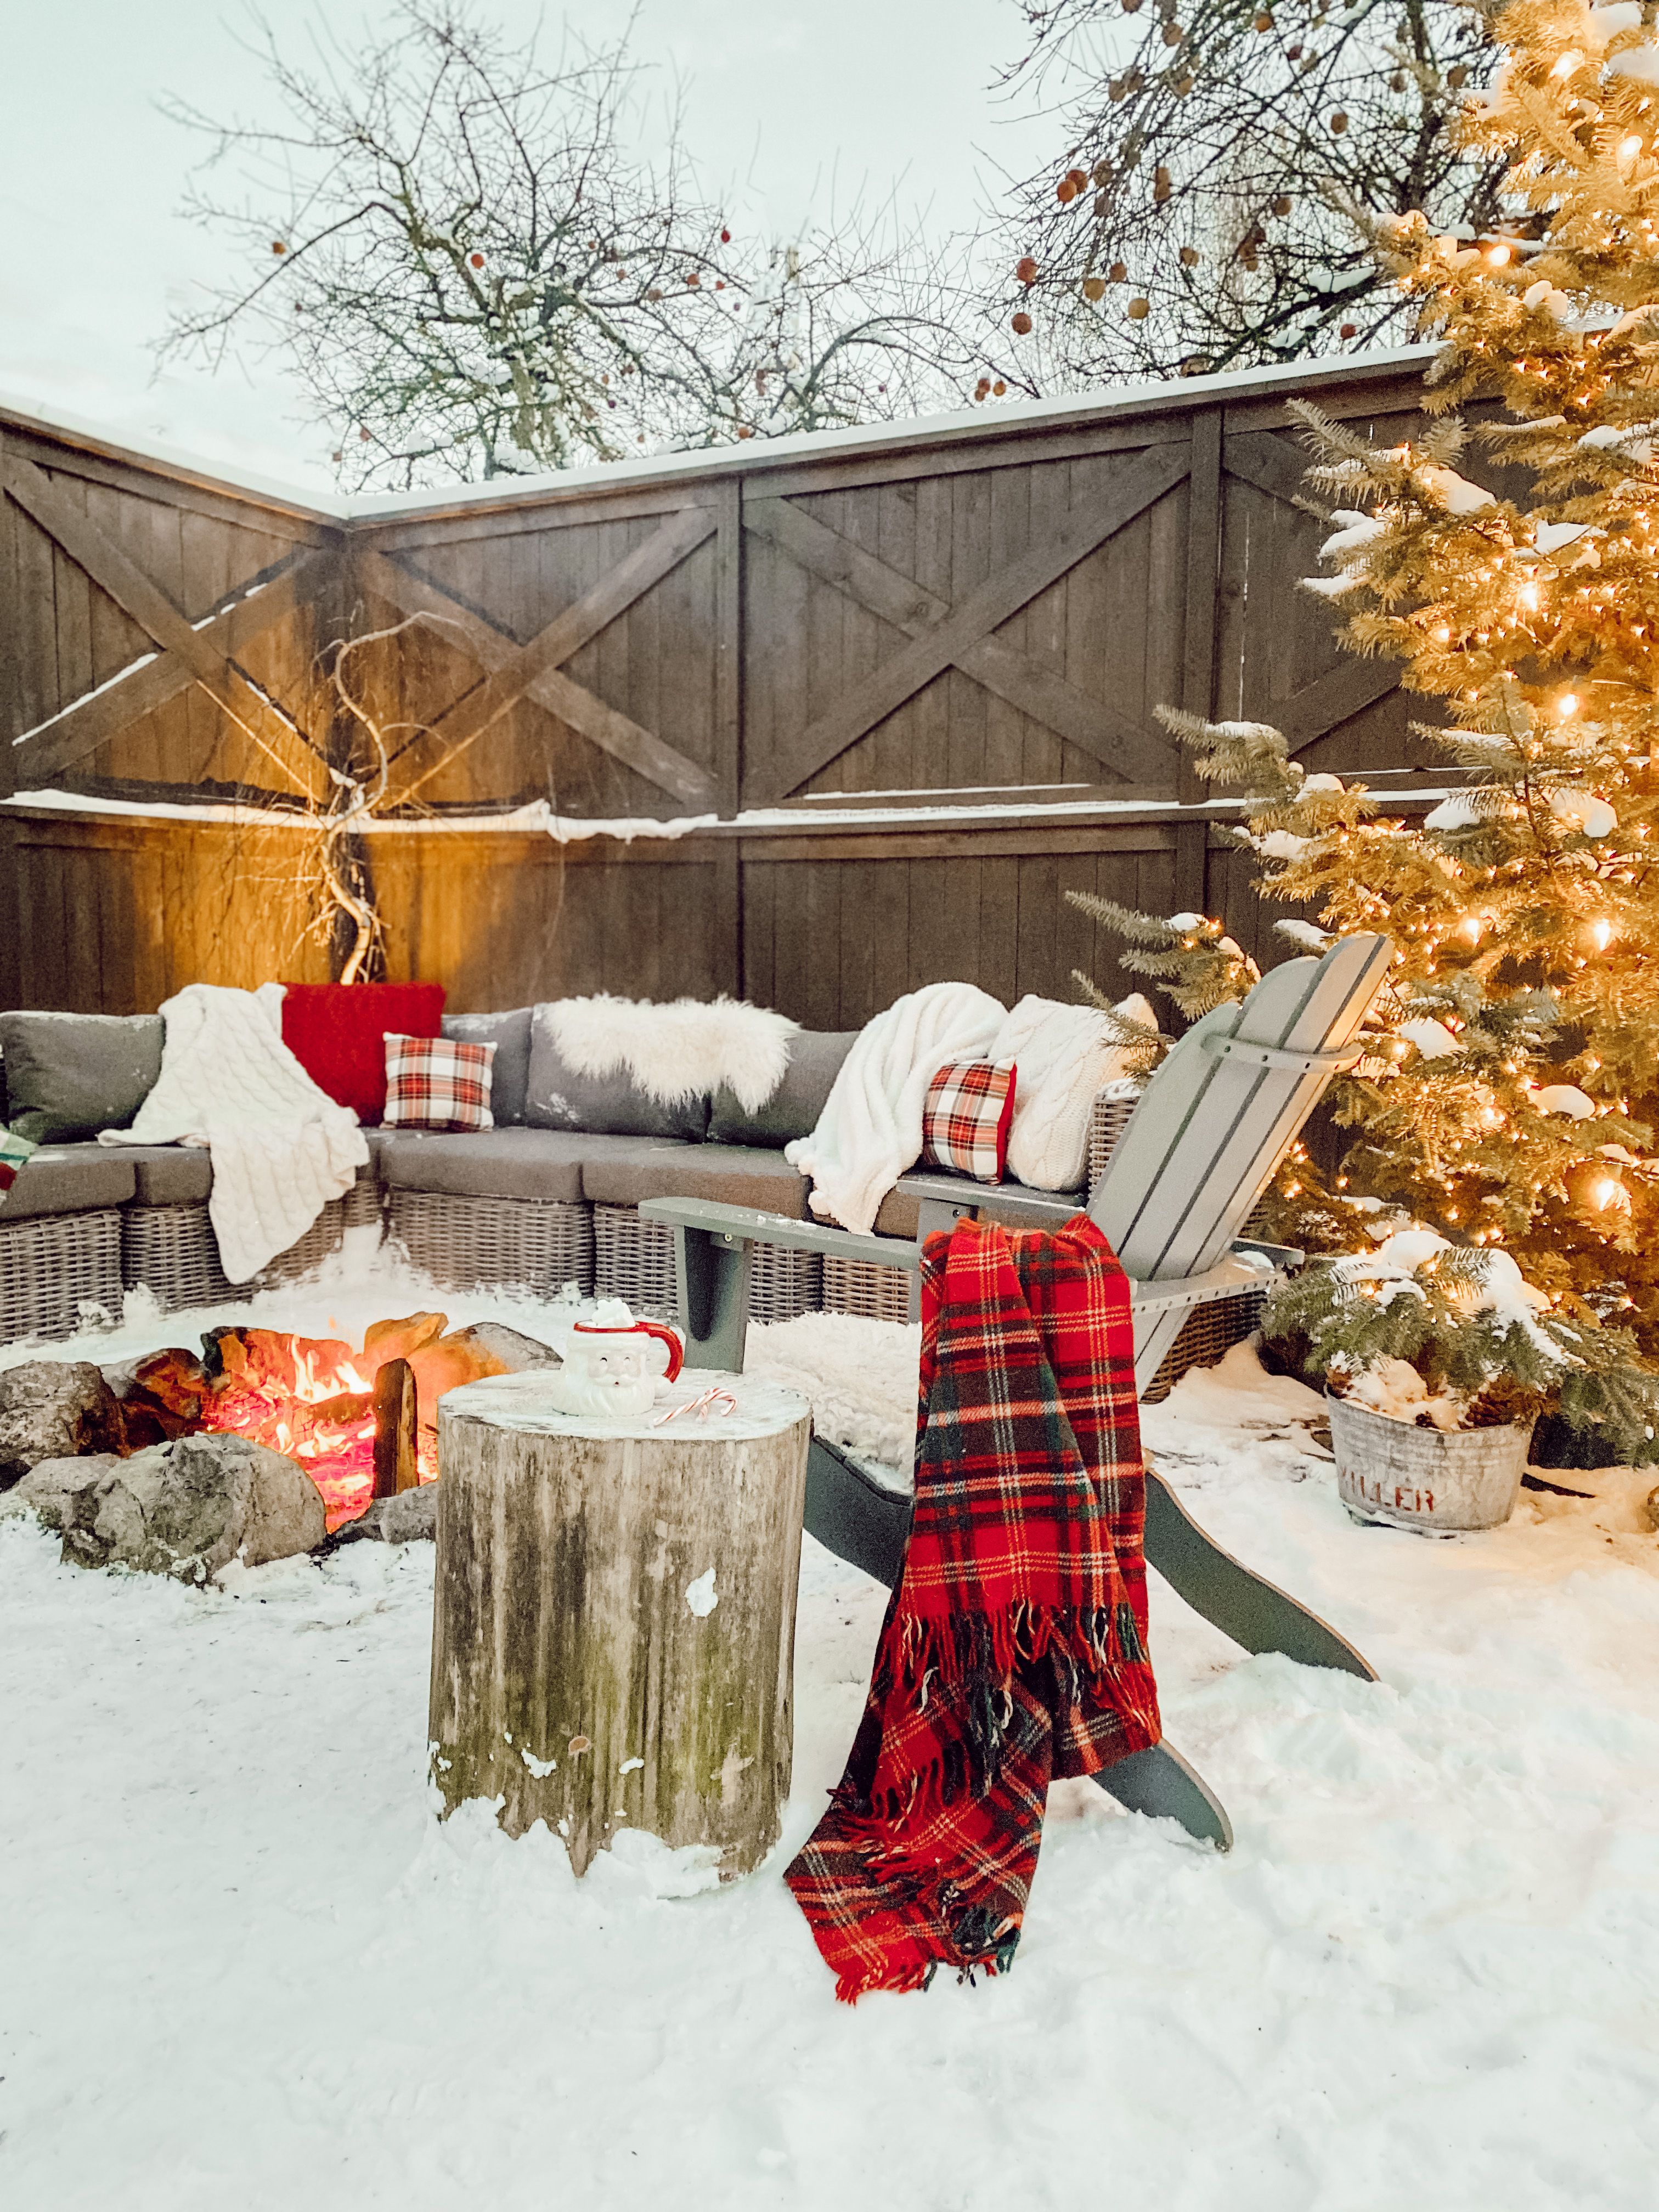 Winter Wonderland Party Ideas - Celebrations at Home